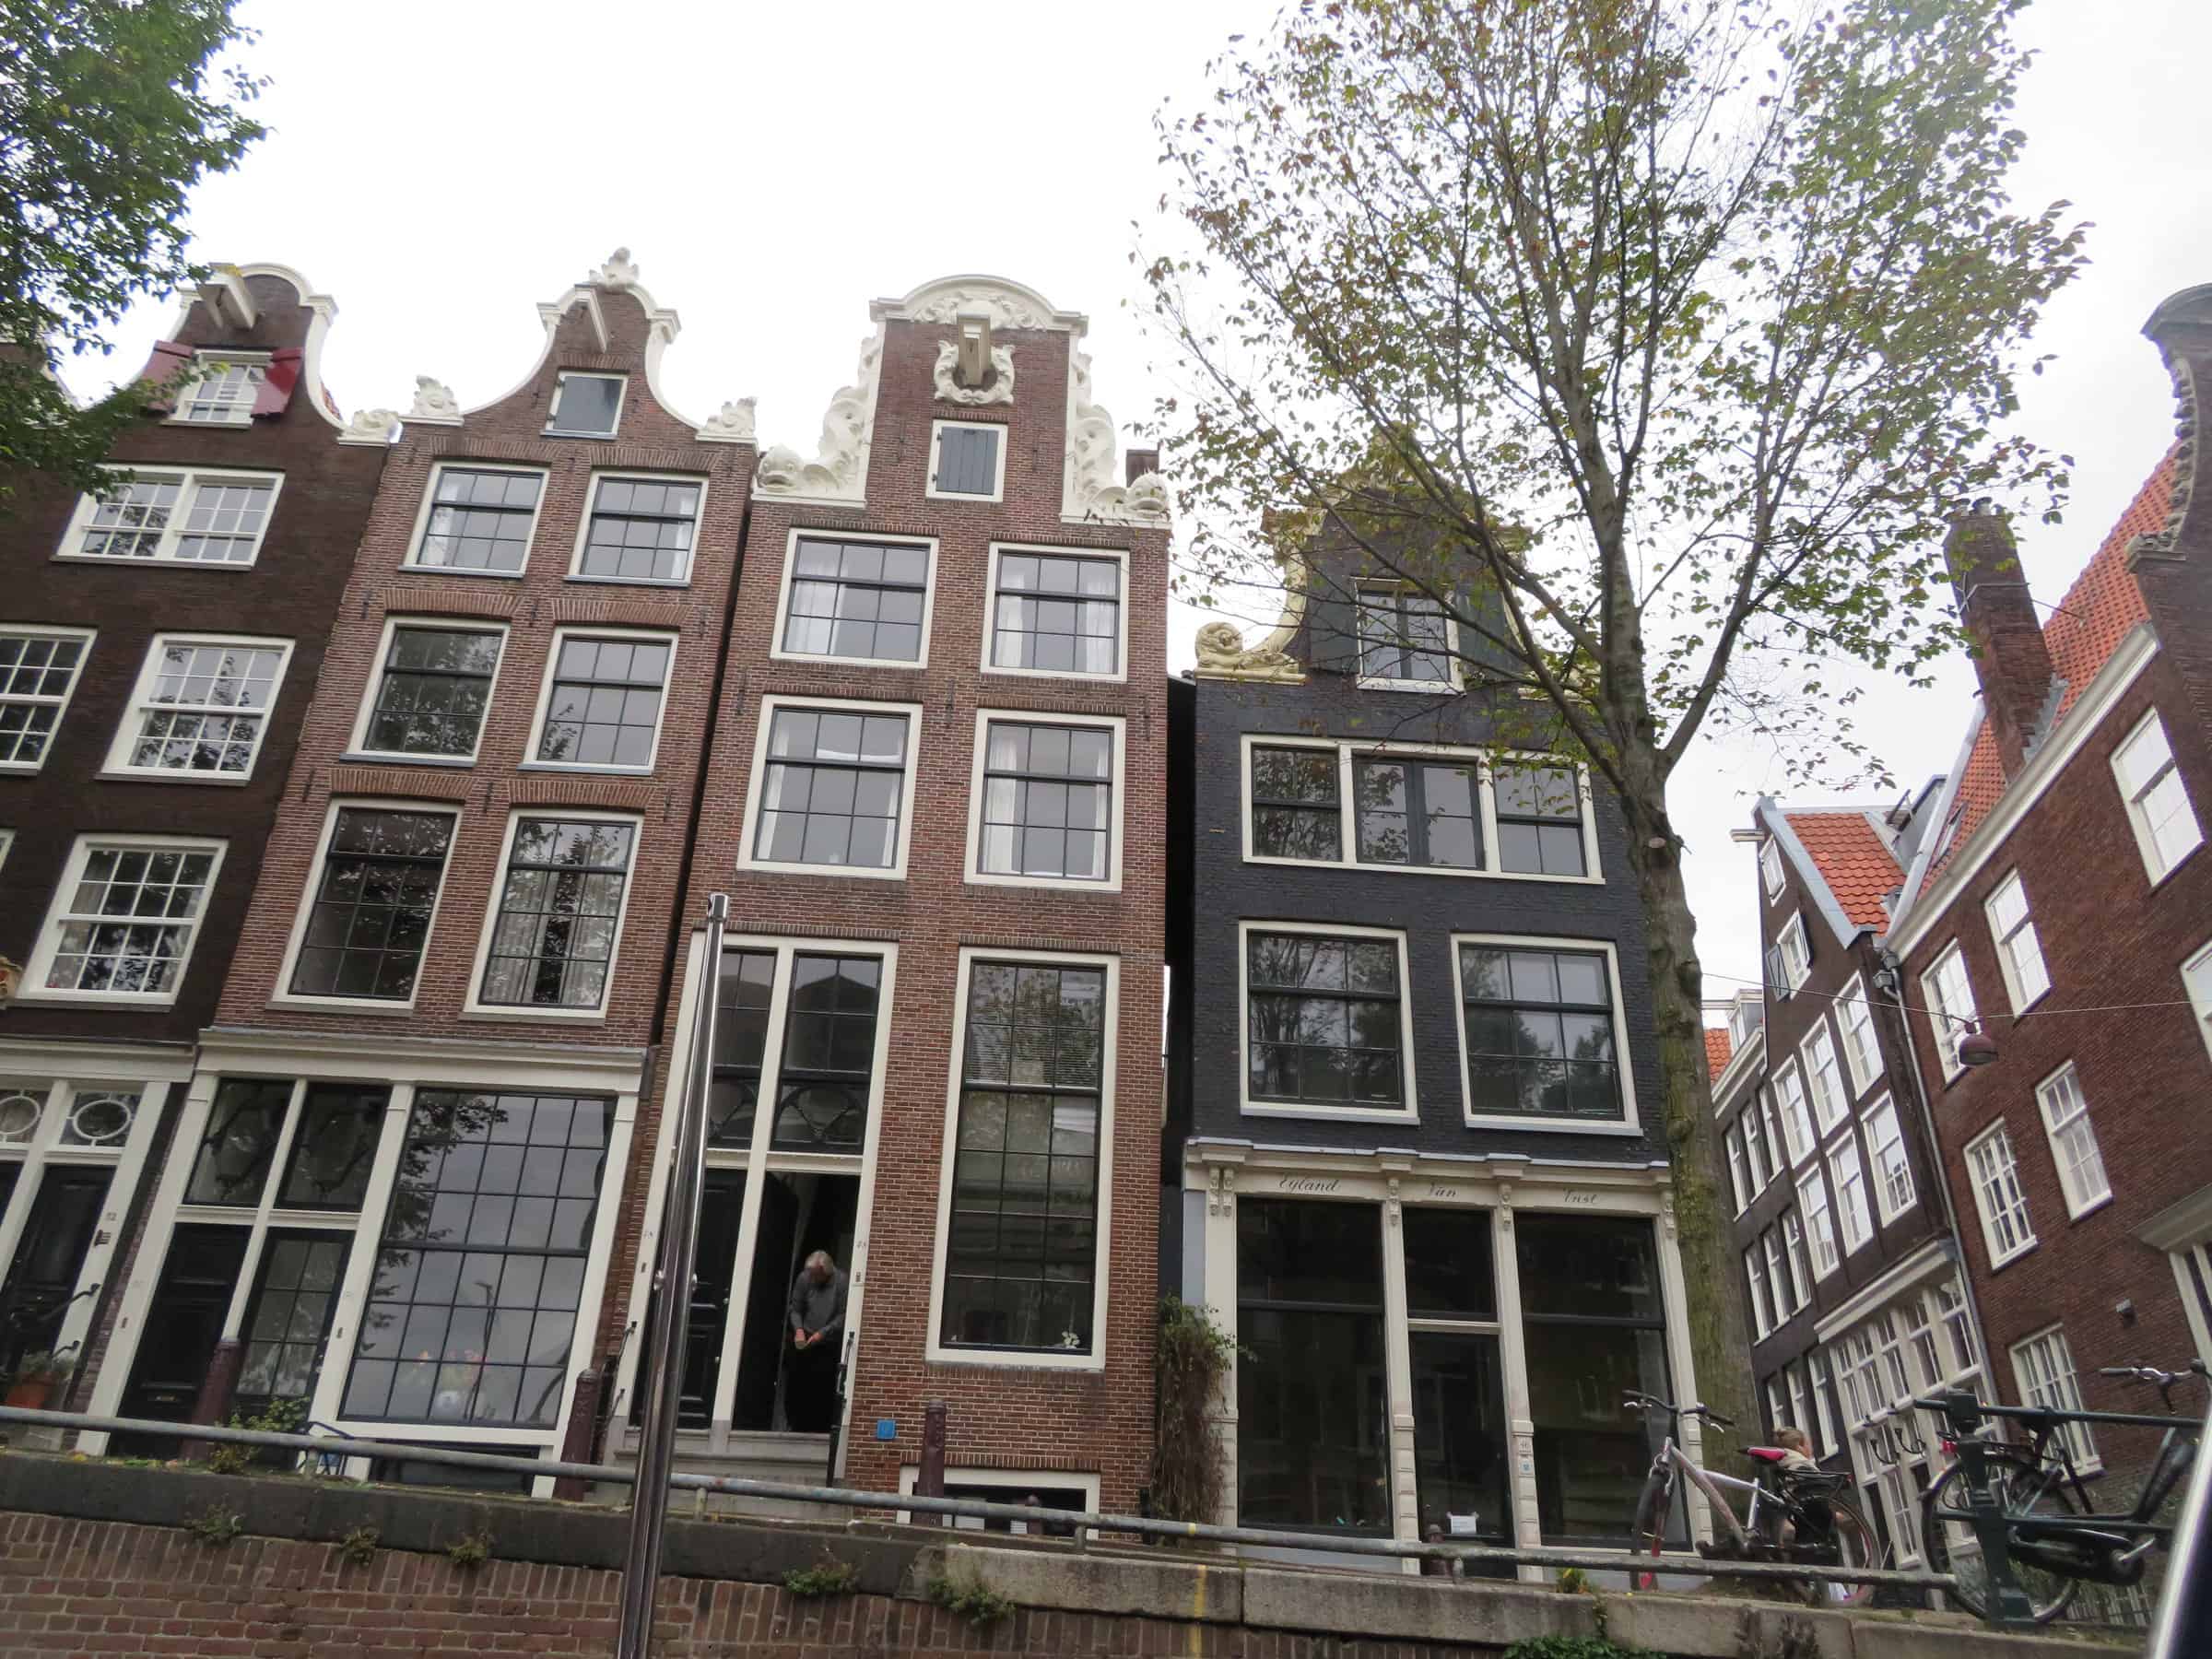 A row of traditional Dutch canal houses in Amsterdam, Netherlands, with their distinctive narrow facades and large windows. The buildings are adorned with ornate gables and sit alongside a canal, with bicycles parked nearby and a tree adding a touch of greenery to the urban scene. The overcast sky highlights the historic charm of this picturesque neighborhood.